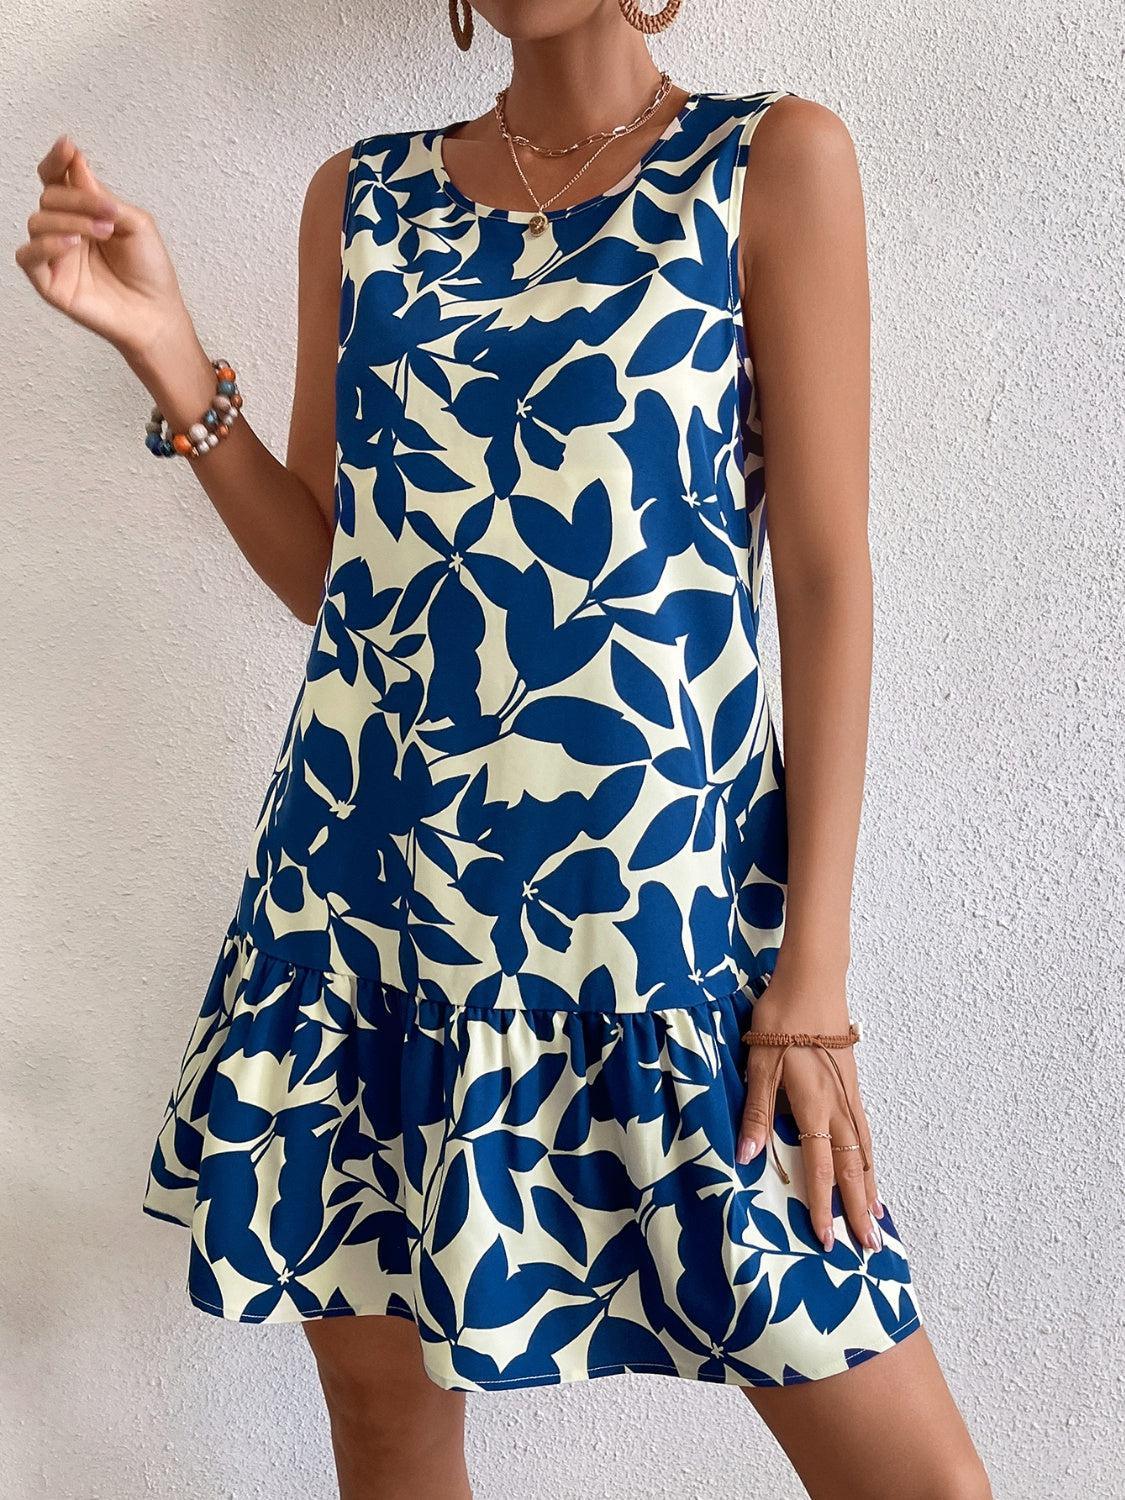 a woman in a blue and white dress posing for a picture